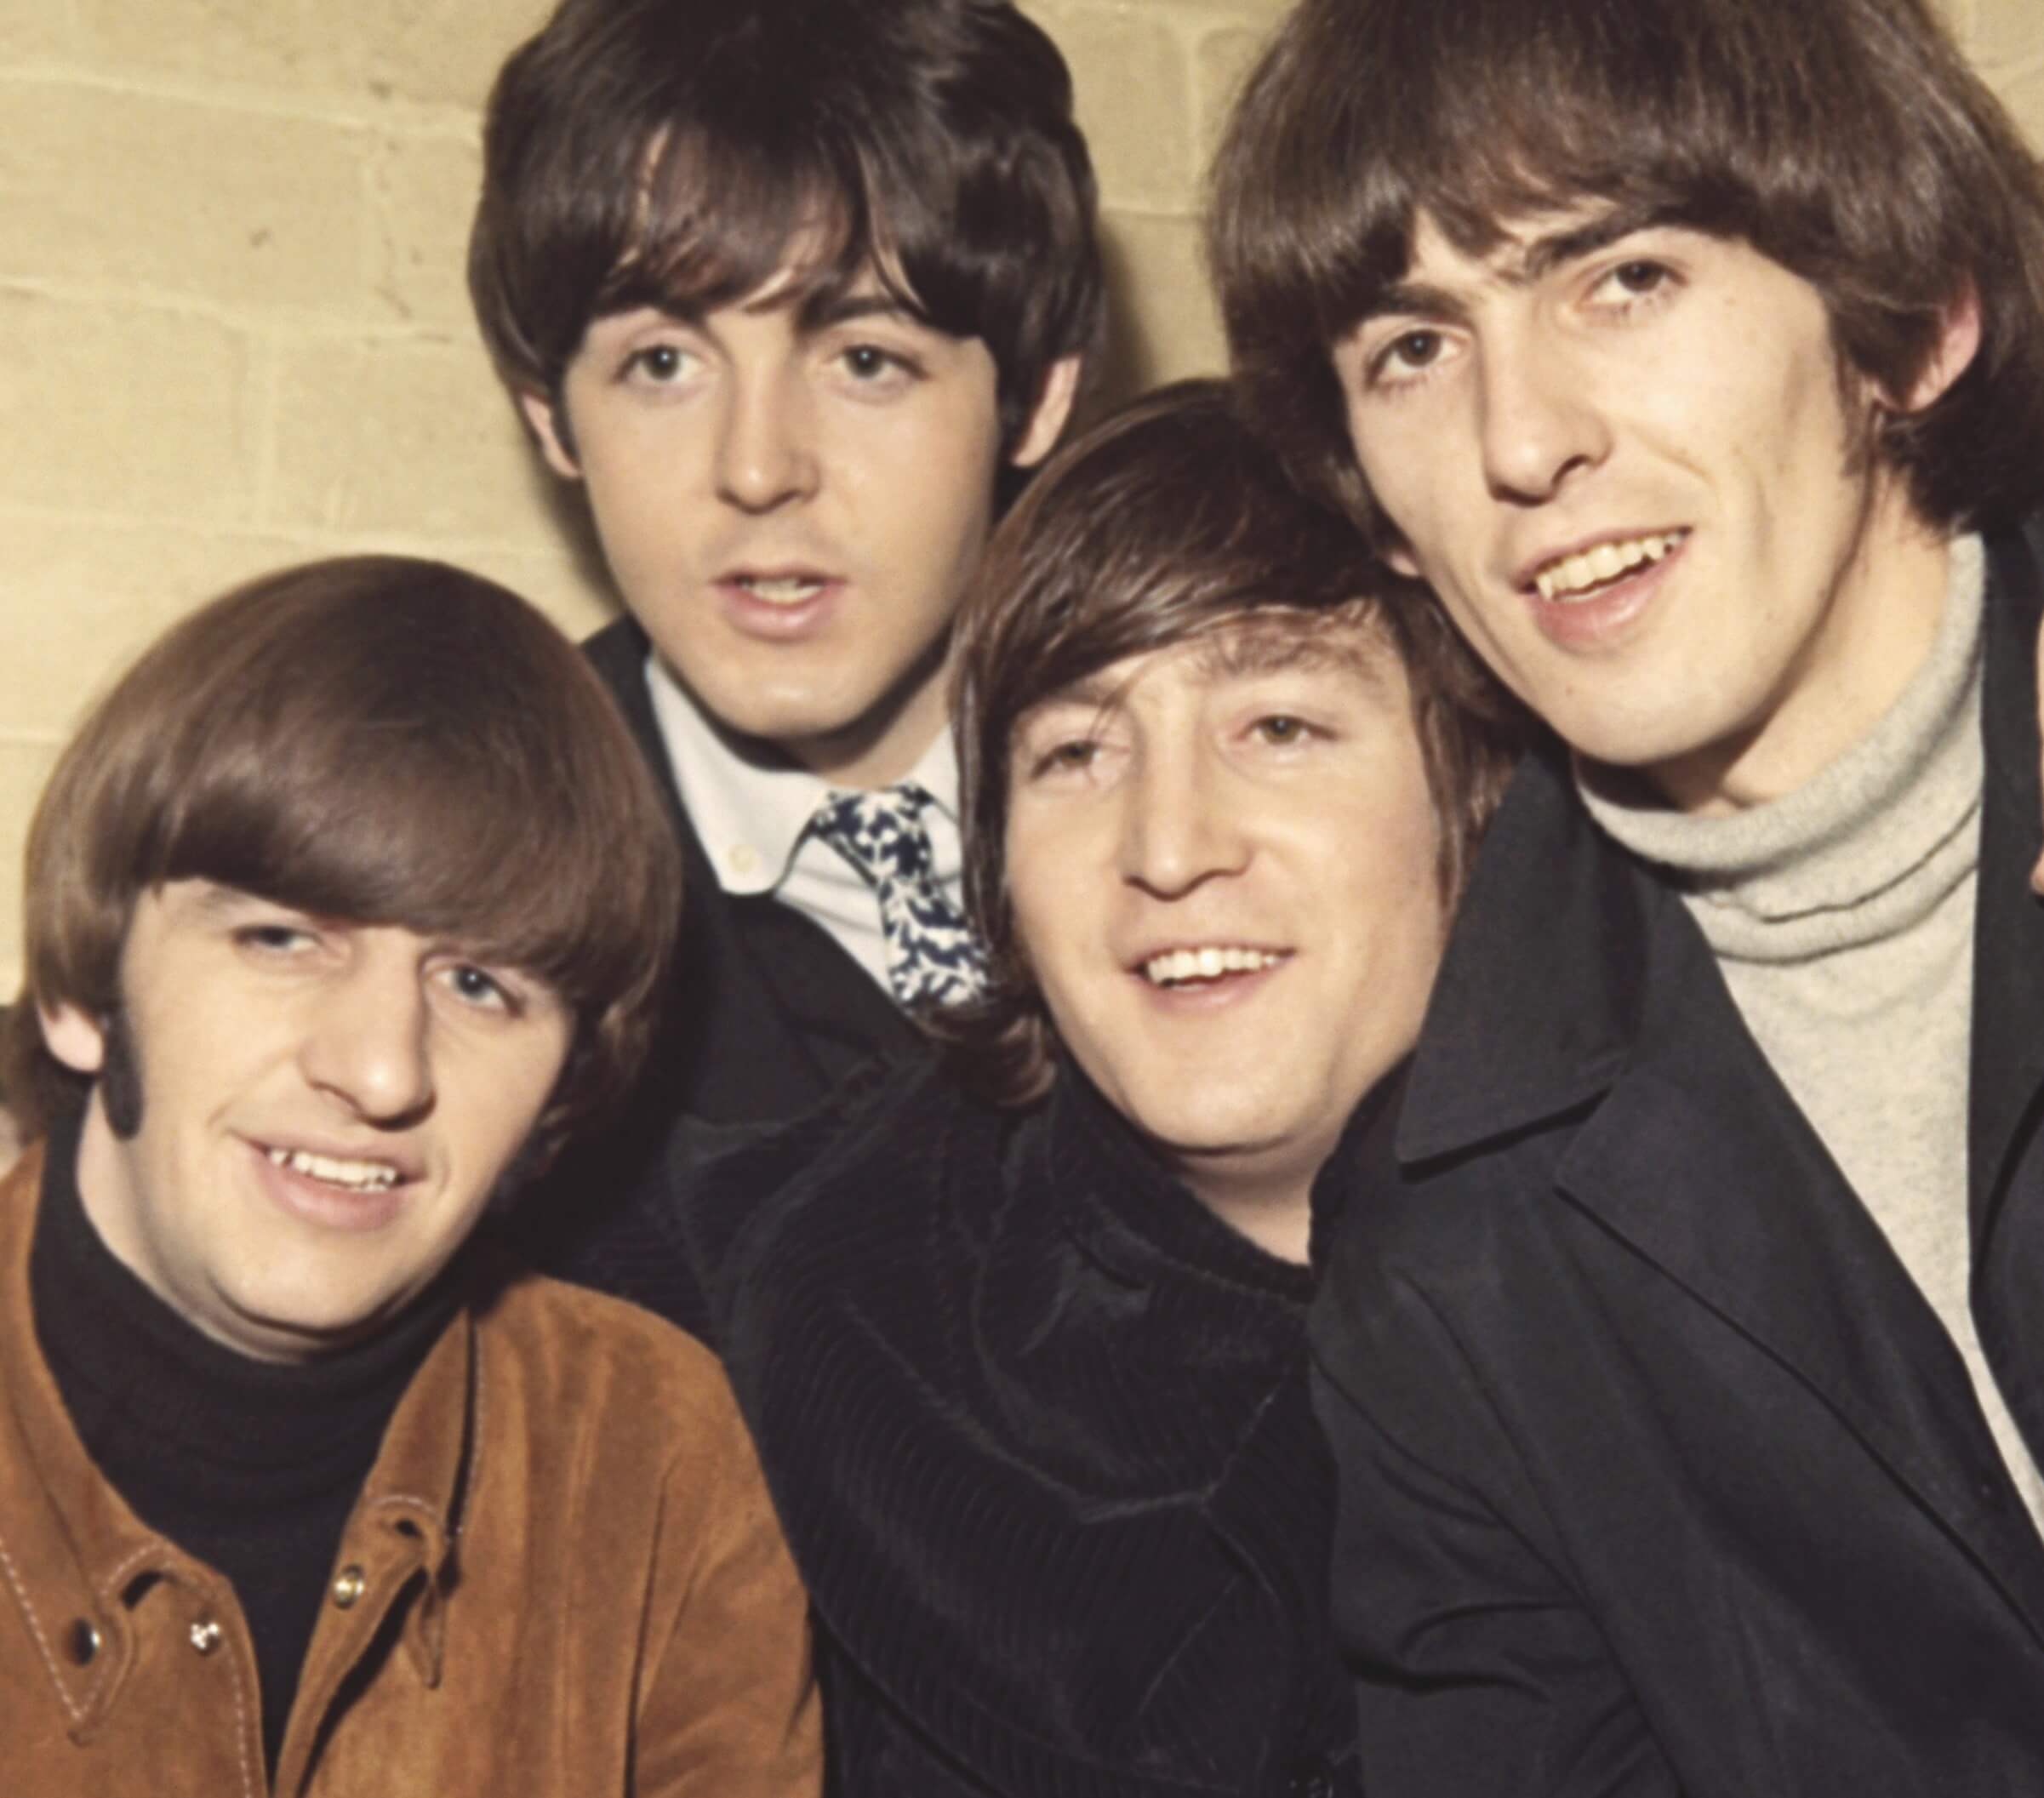 You are currently viewing The Story Behind The Beatles’ Stellar B-Side, “Rain”